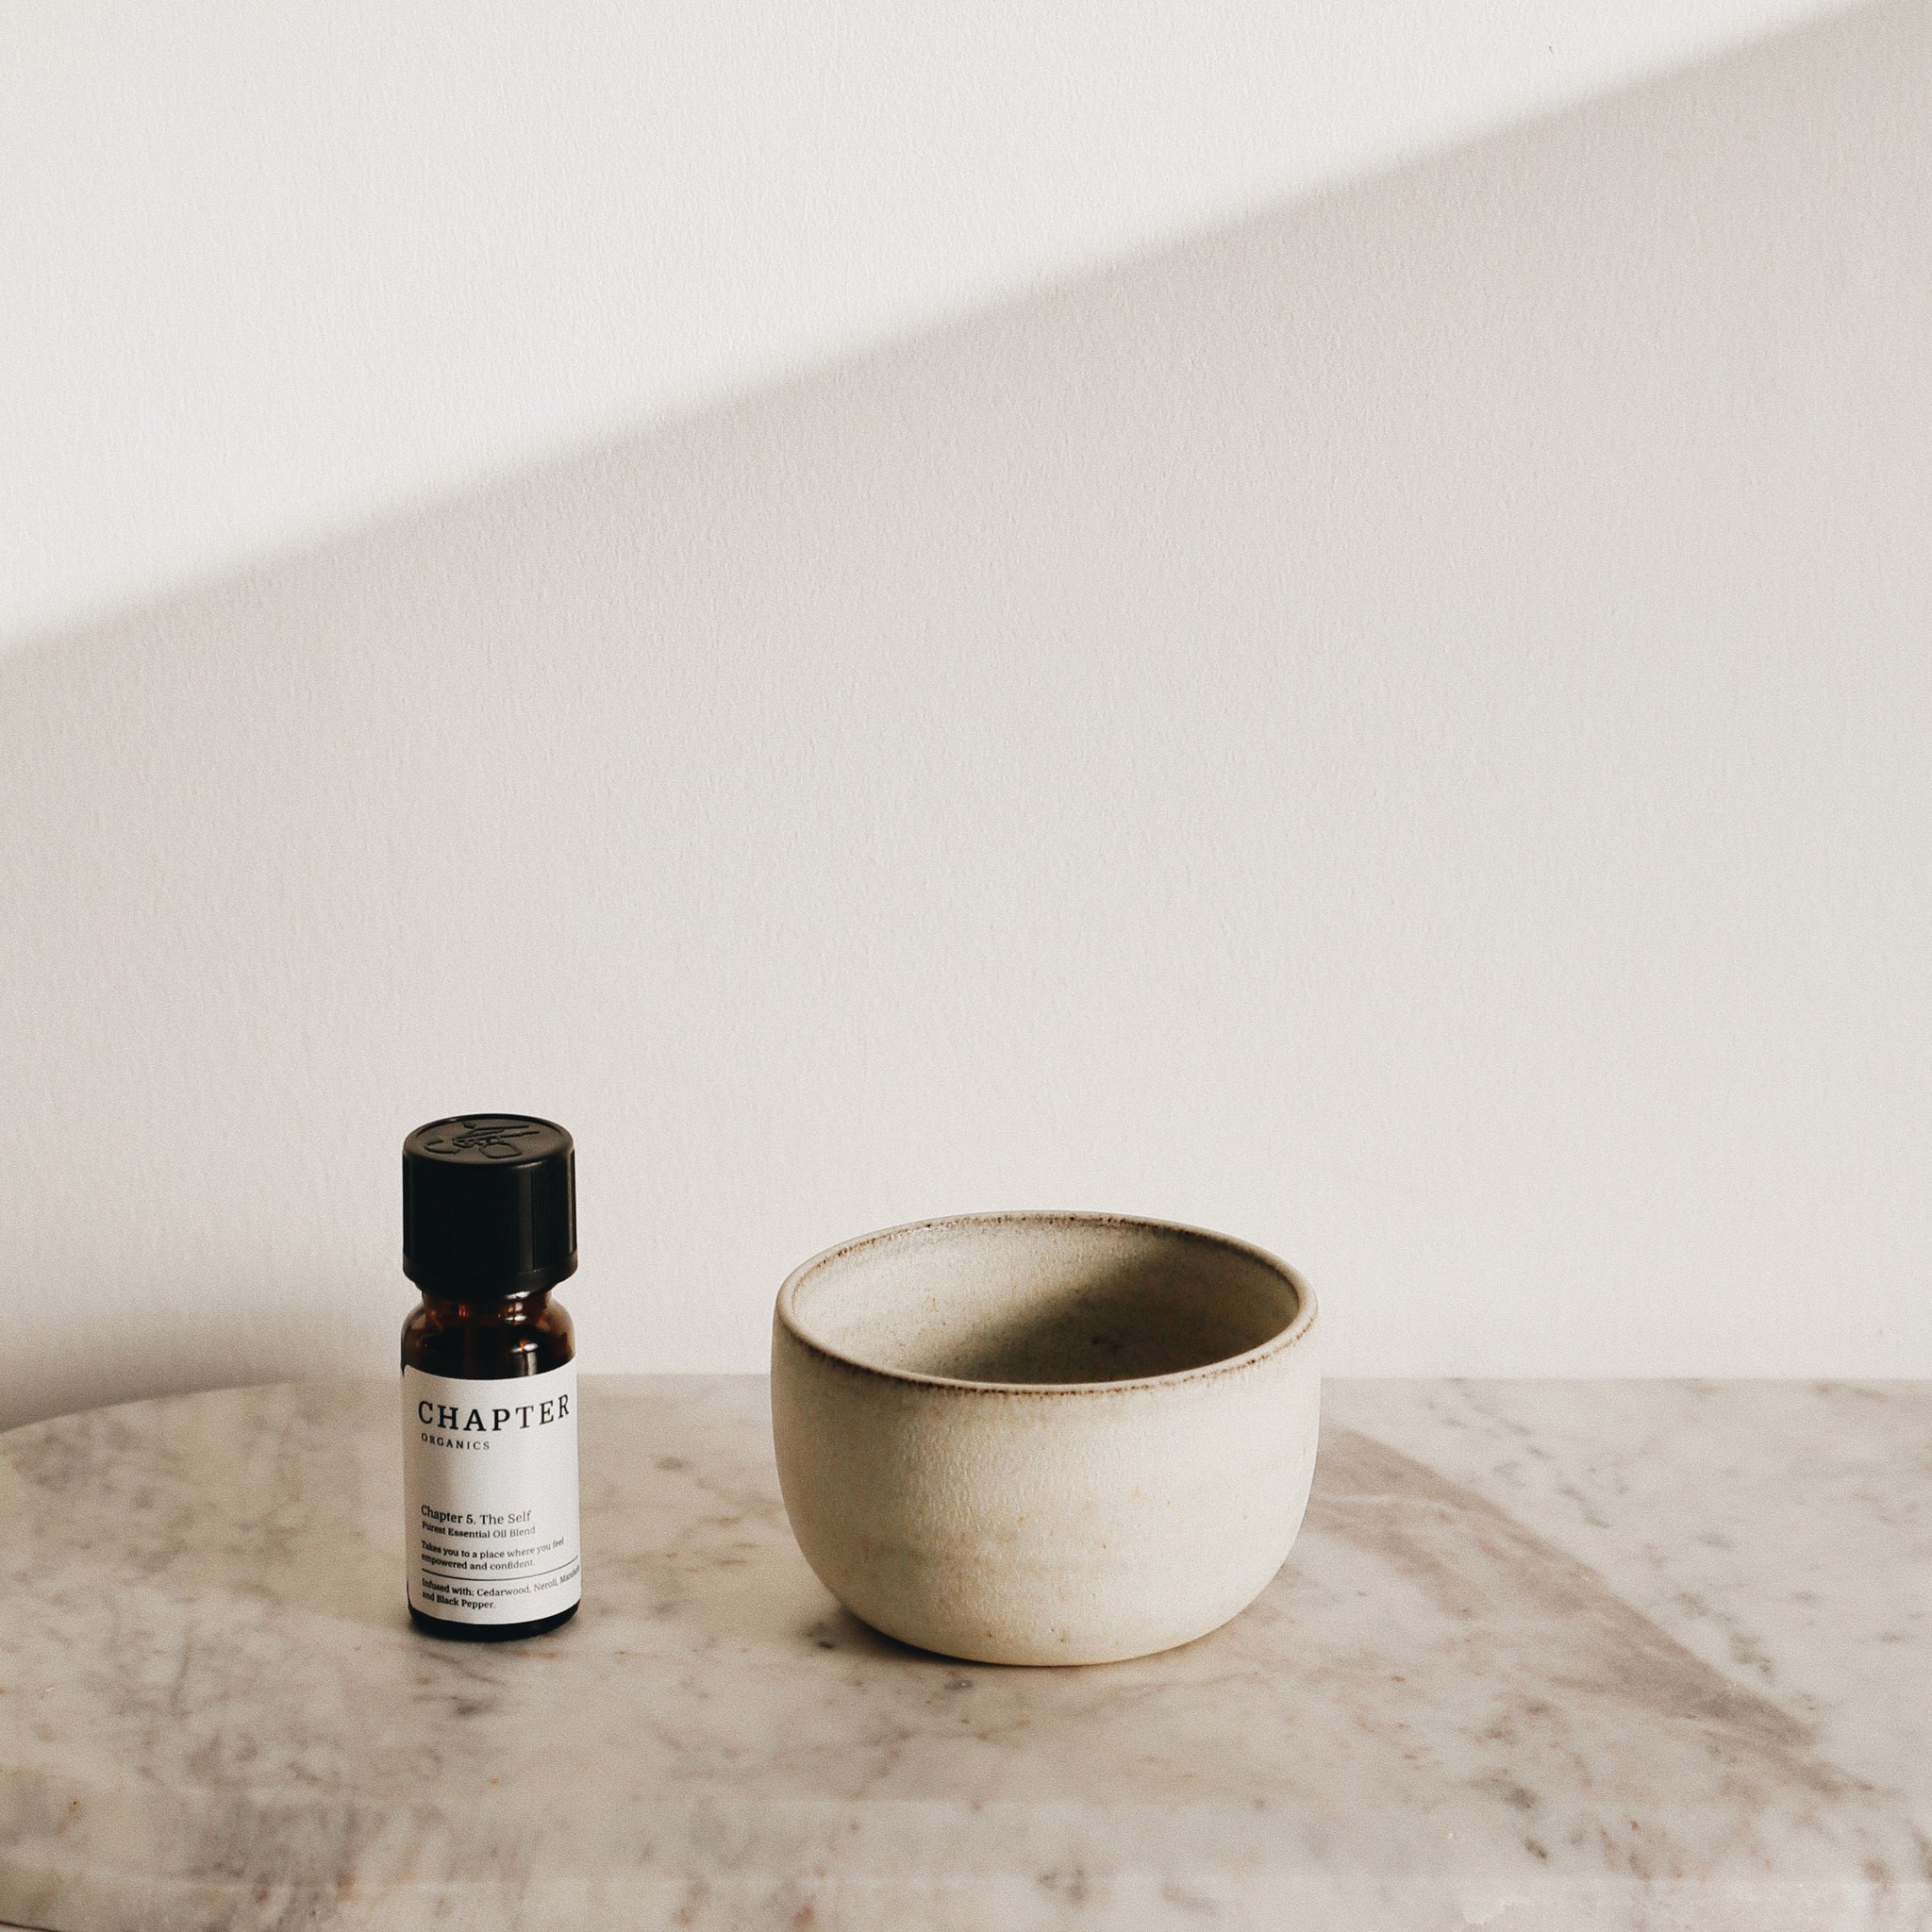 The Clarity (formerly The Remedy) Purest Essential Oil Blend